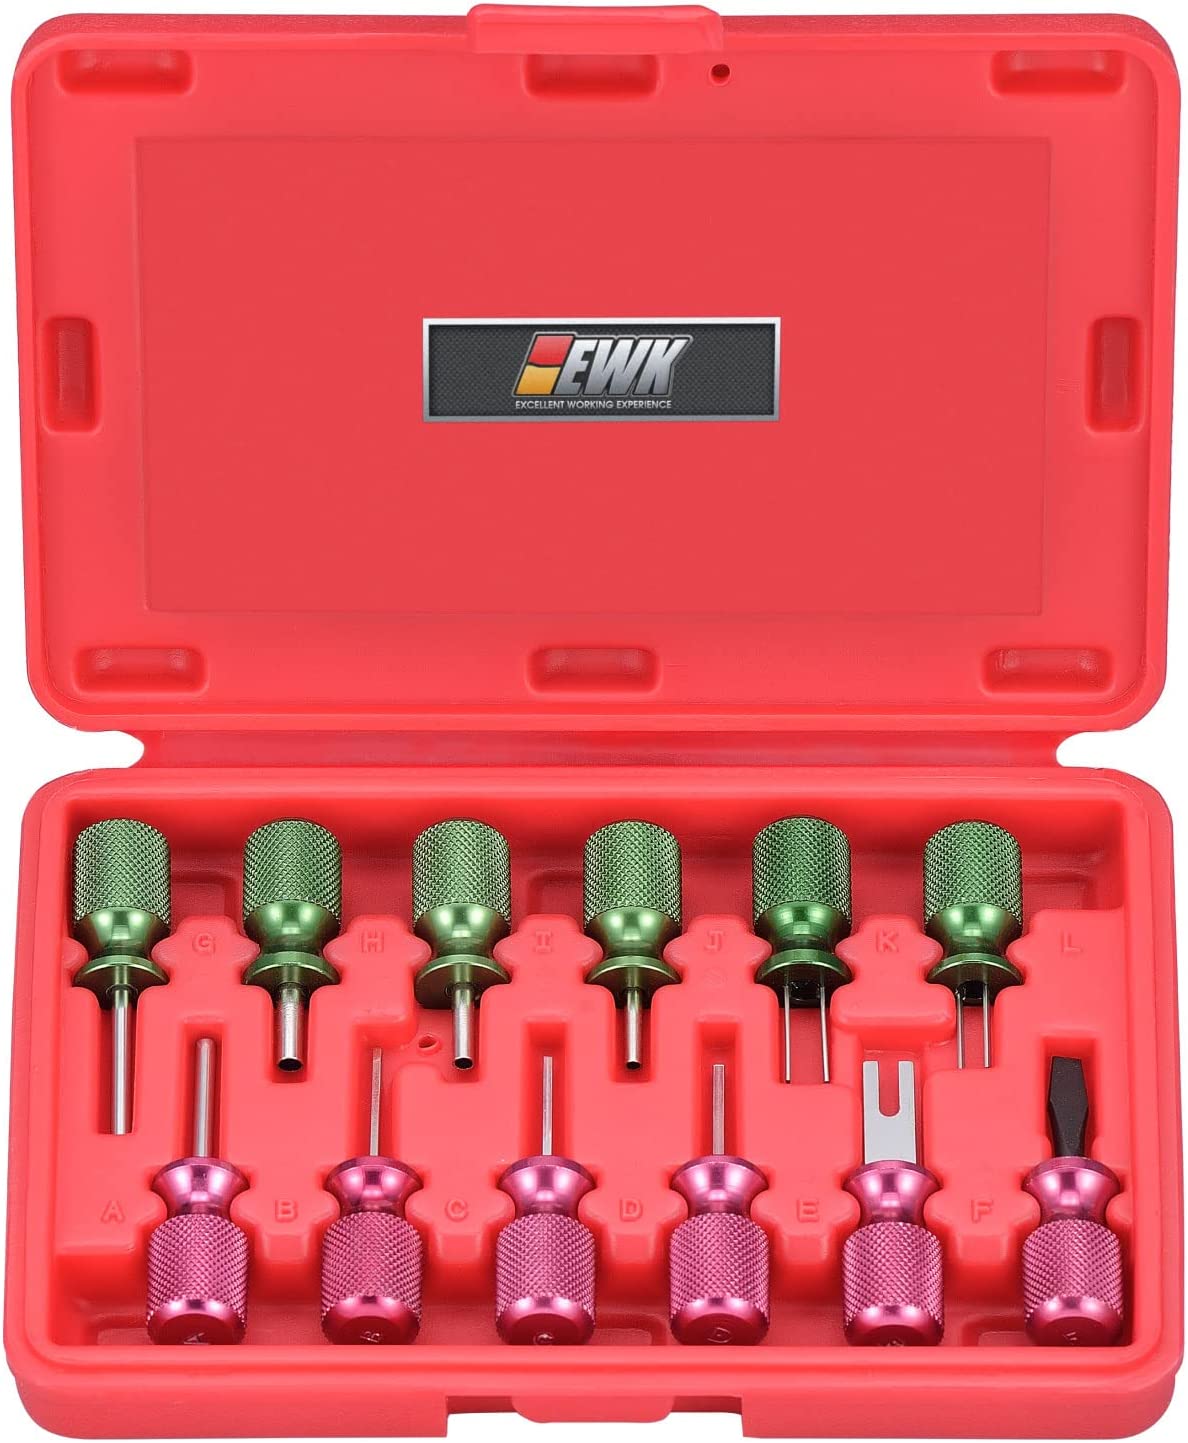 https://www.dontwasteyourmoney.com/wp-content/uploads/2020/05/ewk-automotive-wire-electrical-terminal-removal-tool.jpg